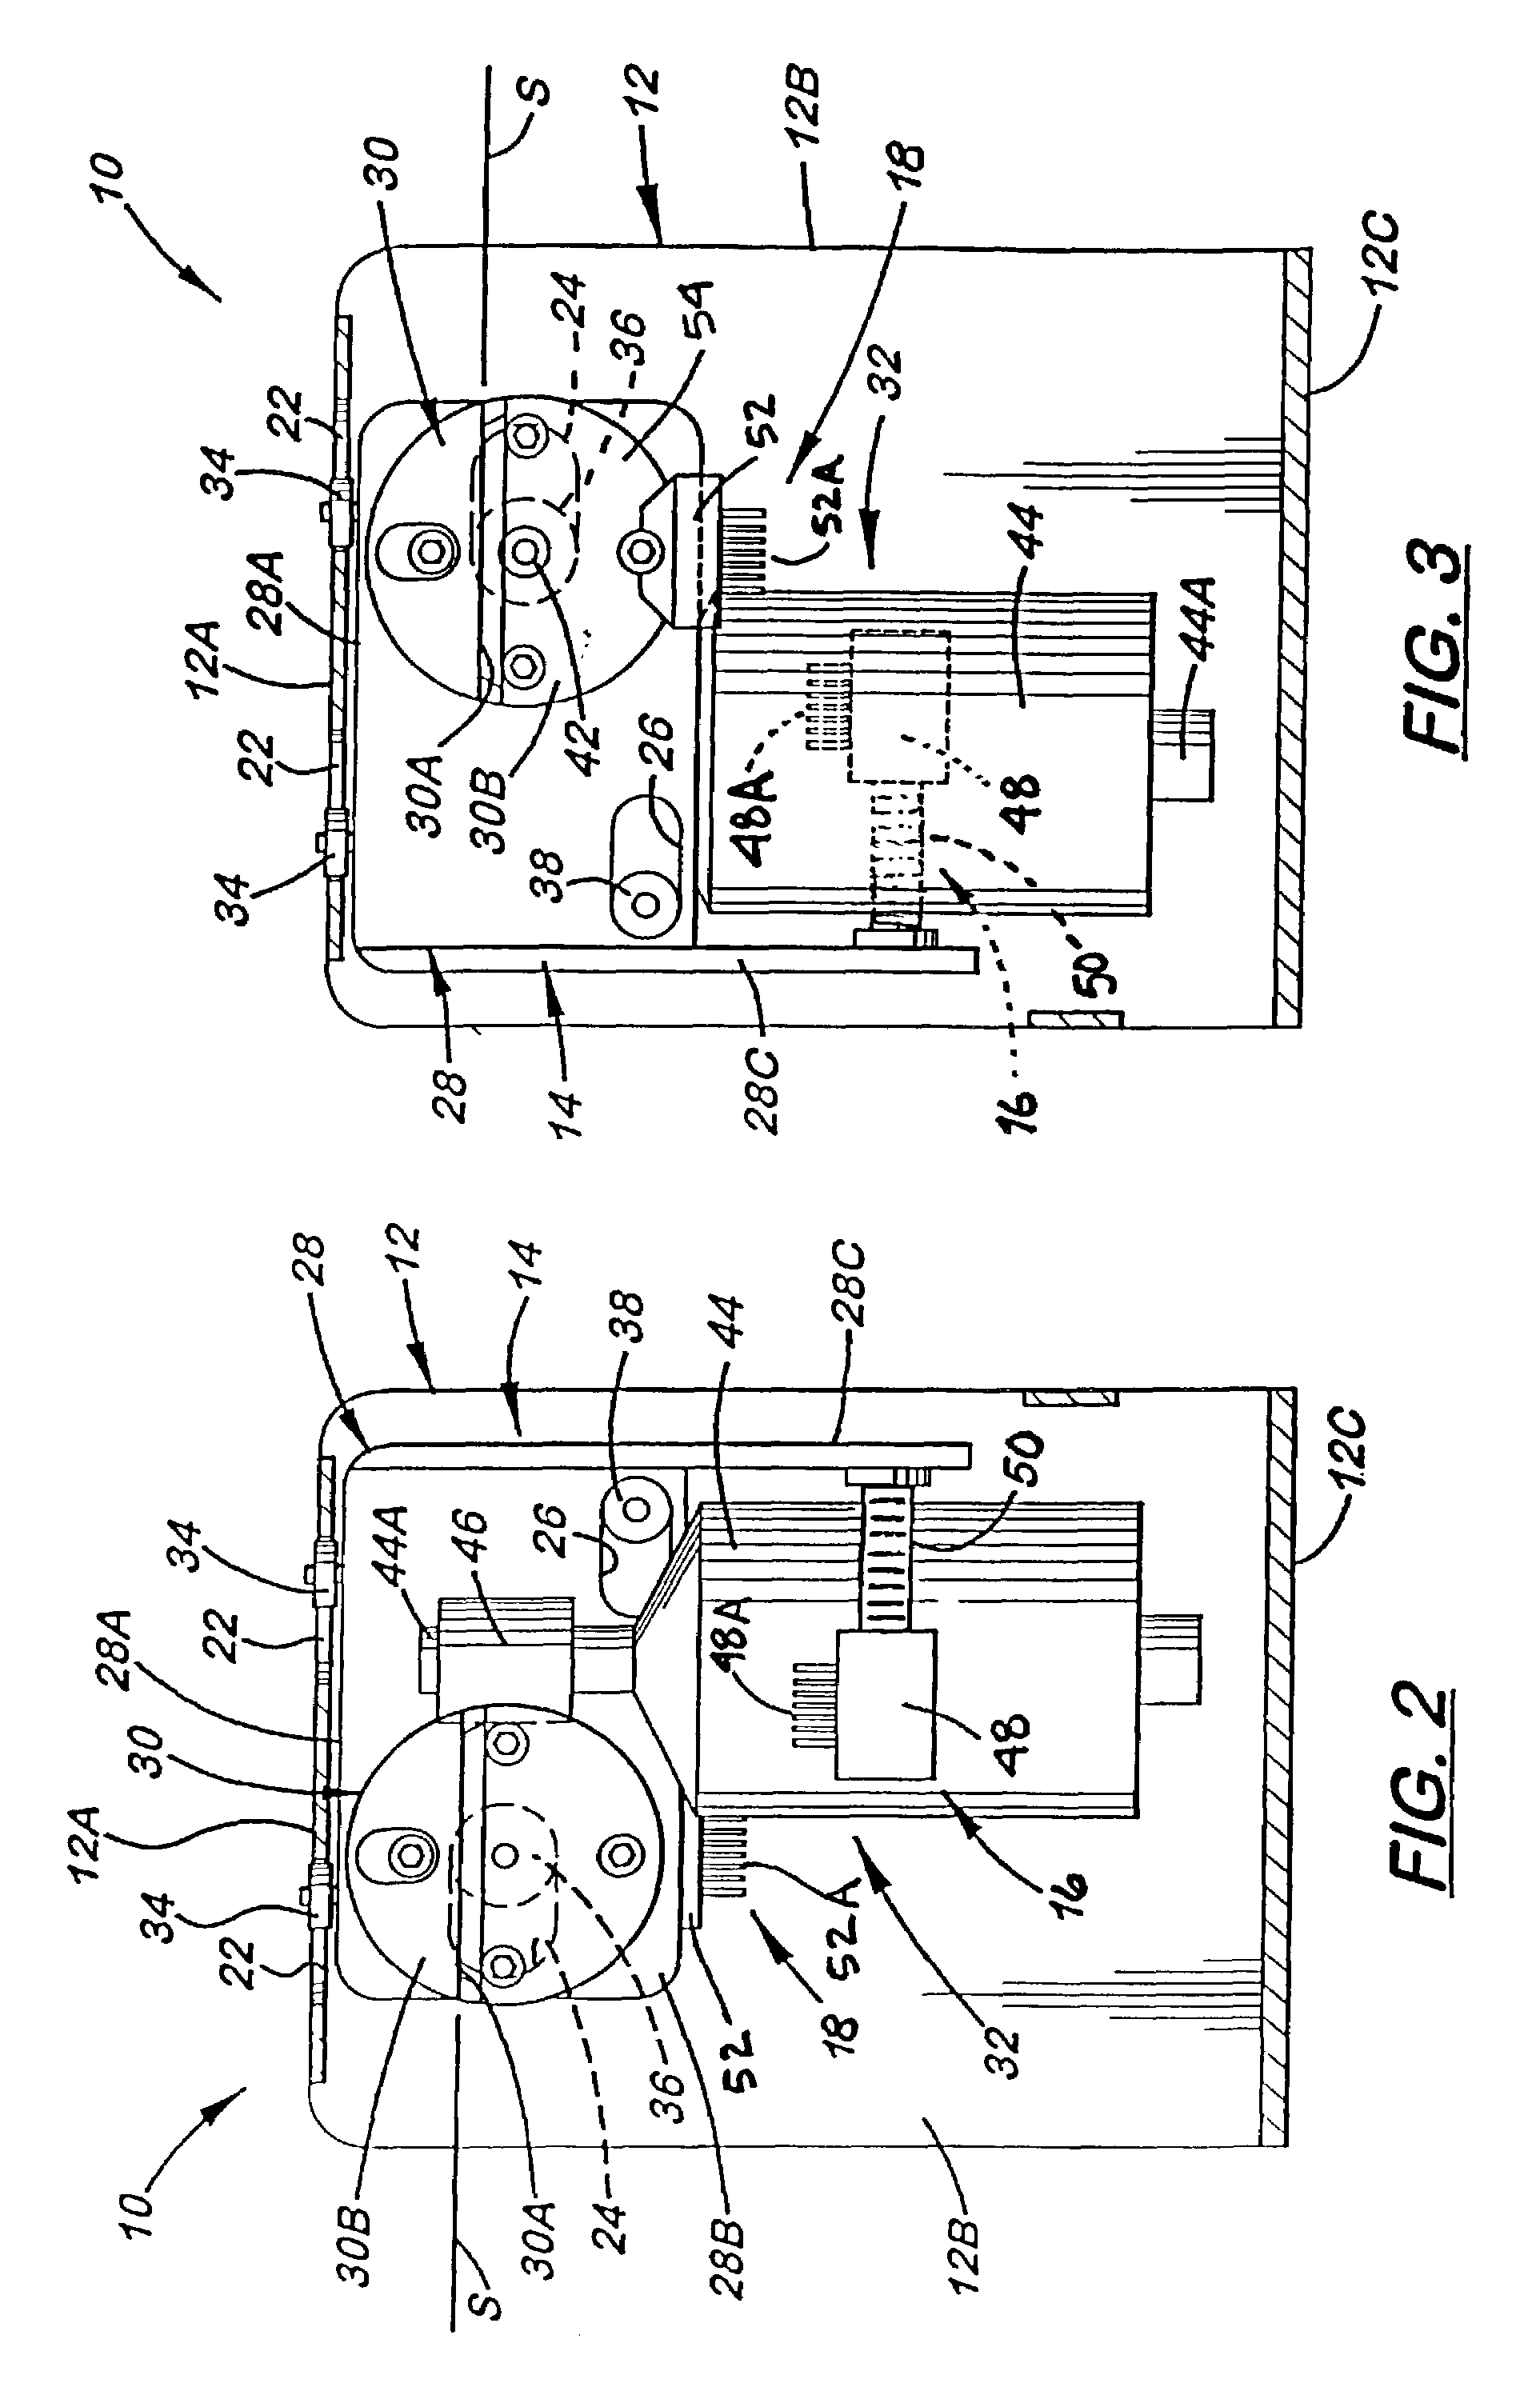 String tensioning force controlling apparatus for a racket stringer